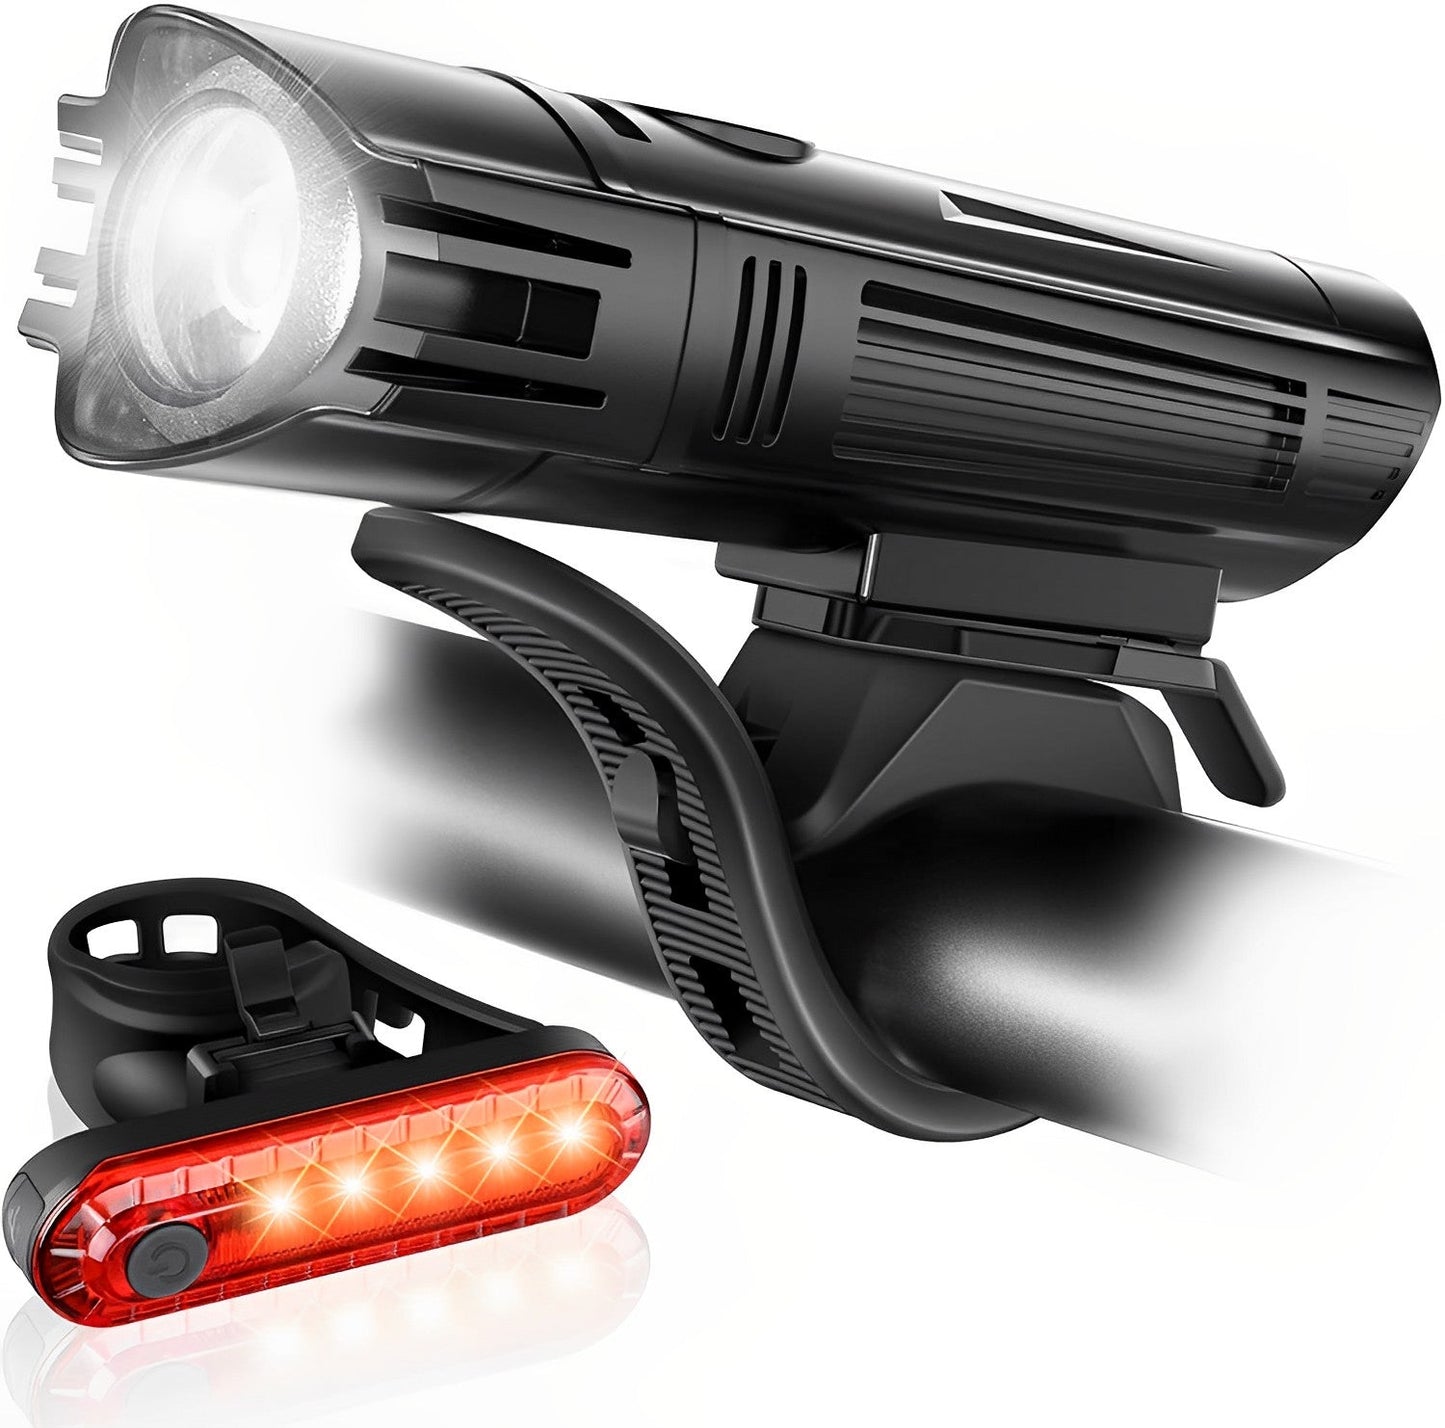 Top-Rated bicycle front and rear LED lights set